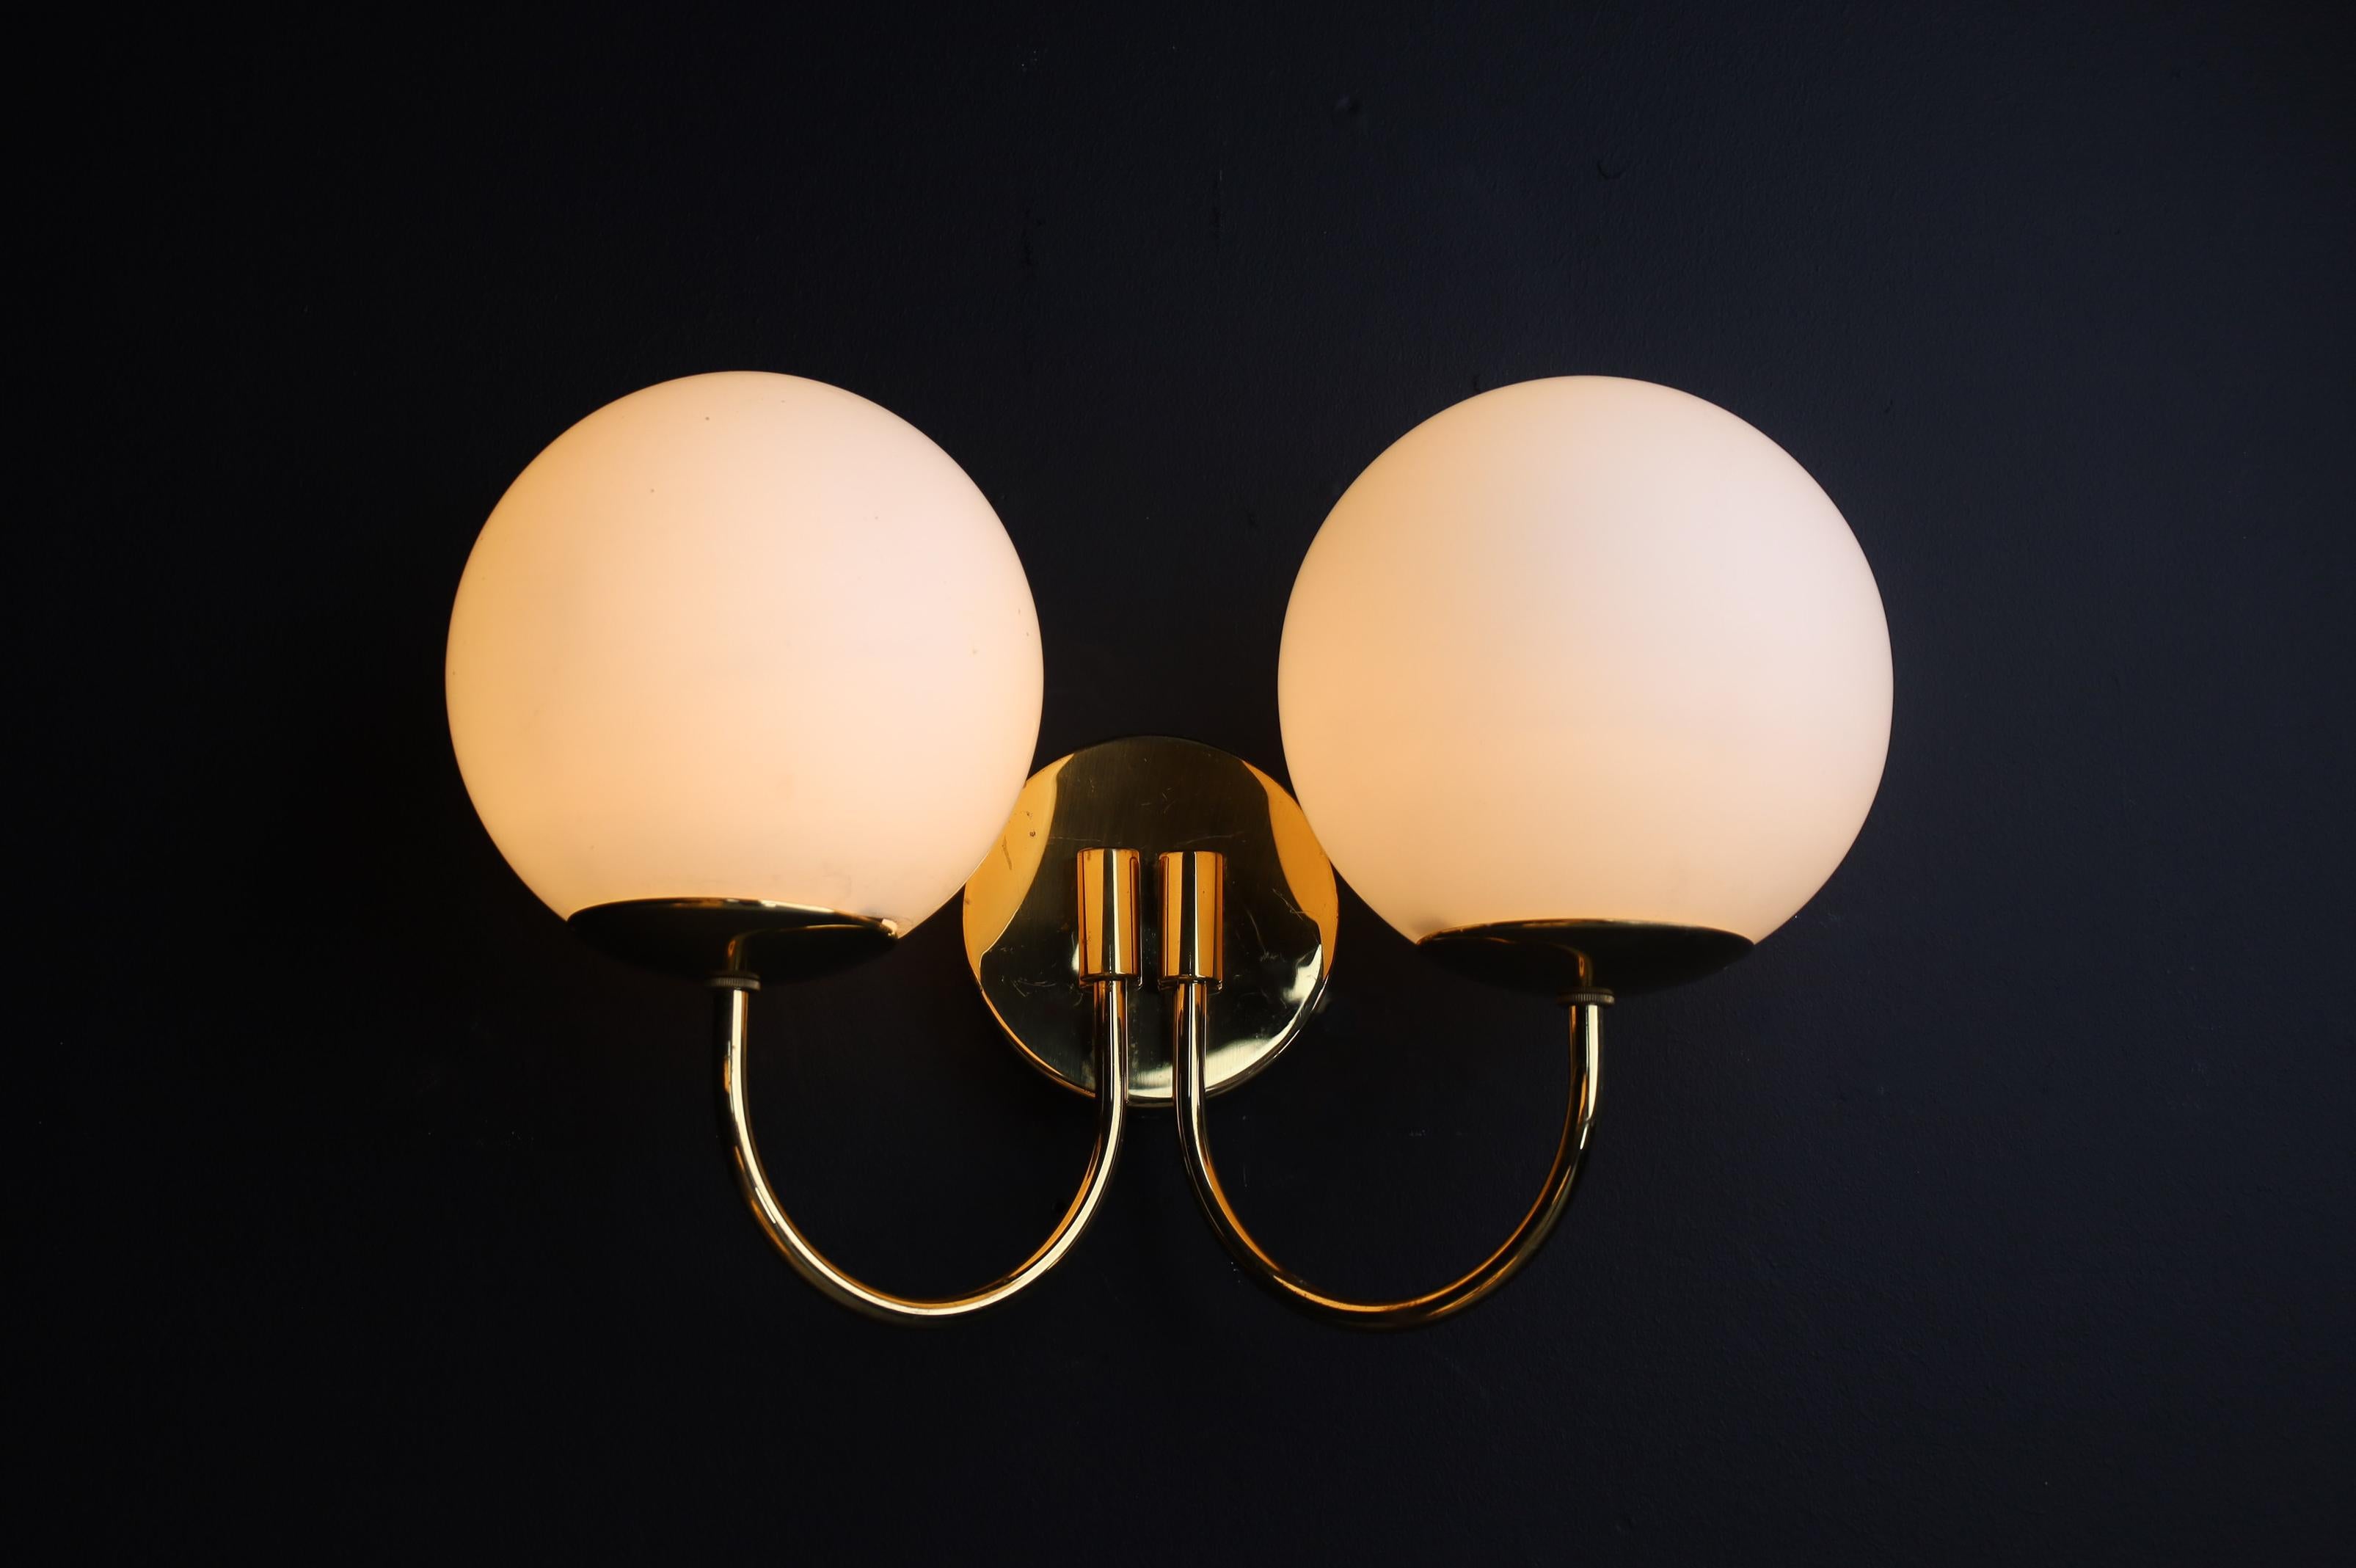 20th Century Elegant Sconces with Brass Fixtures and Opaline Glass Globes, Italy, 1960s For Sale